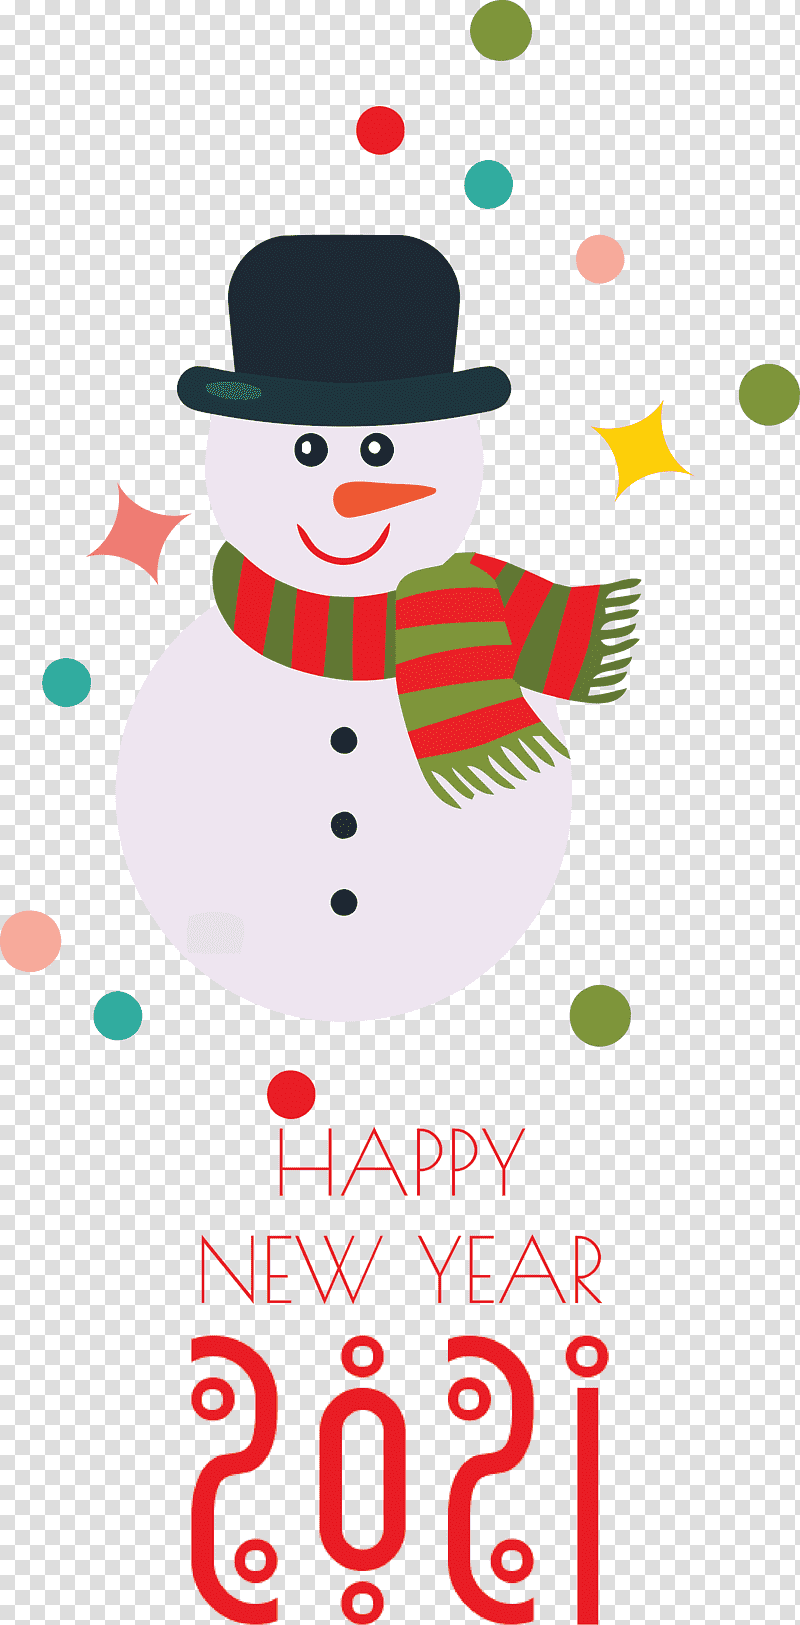 2021 Happy New Year 2021 New Year, Watercolor Painting, Snowman, Christmas Tree, Christmas Day, Ink, Ornament transparent background PNG clipart